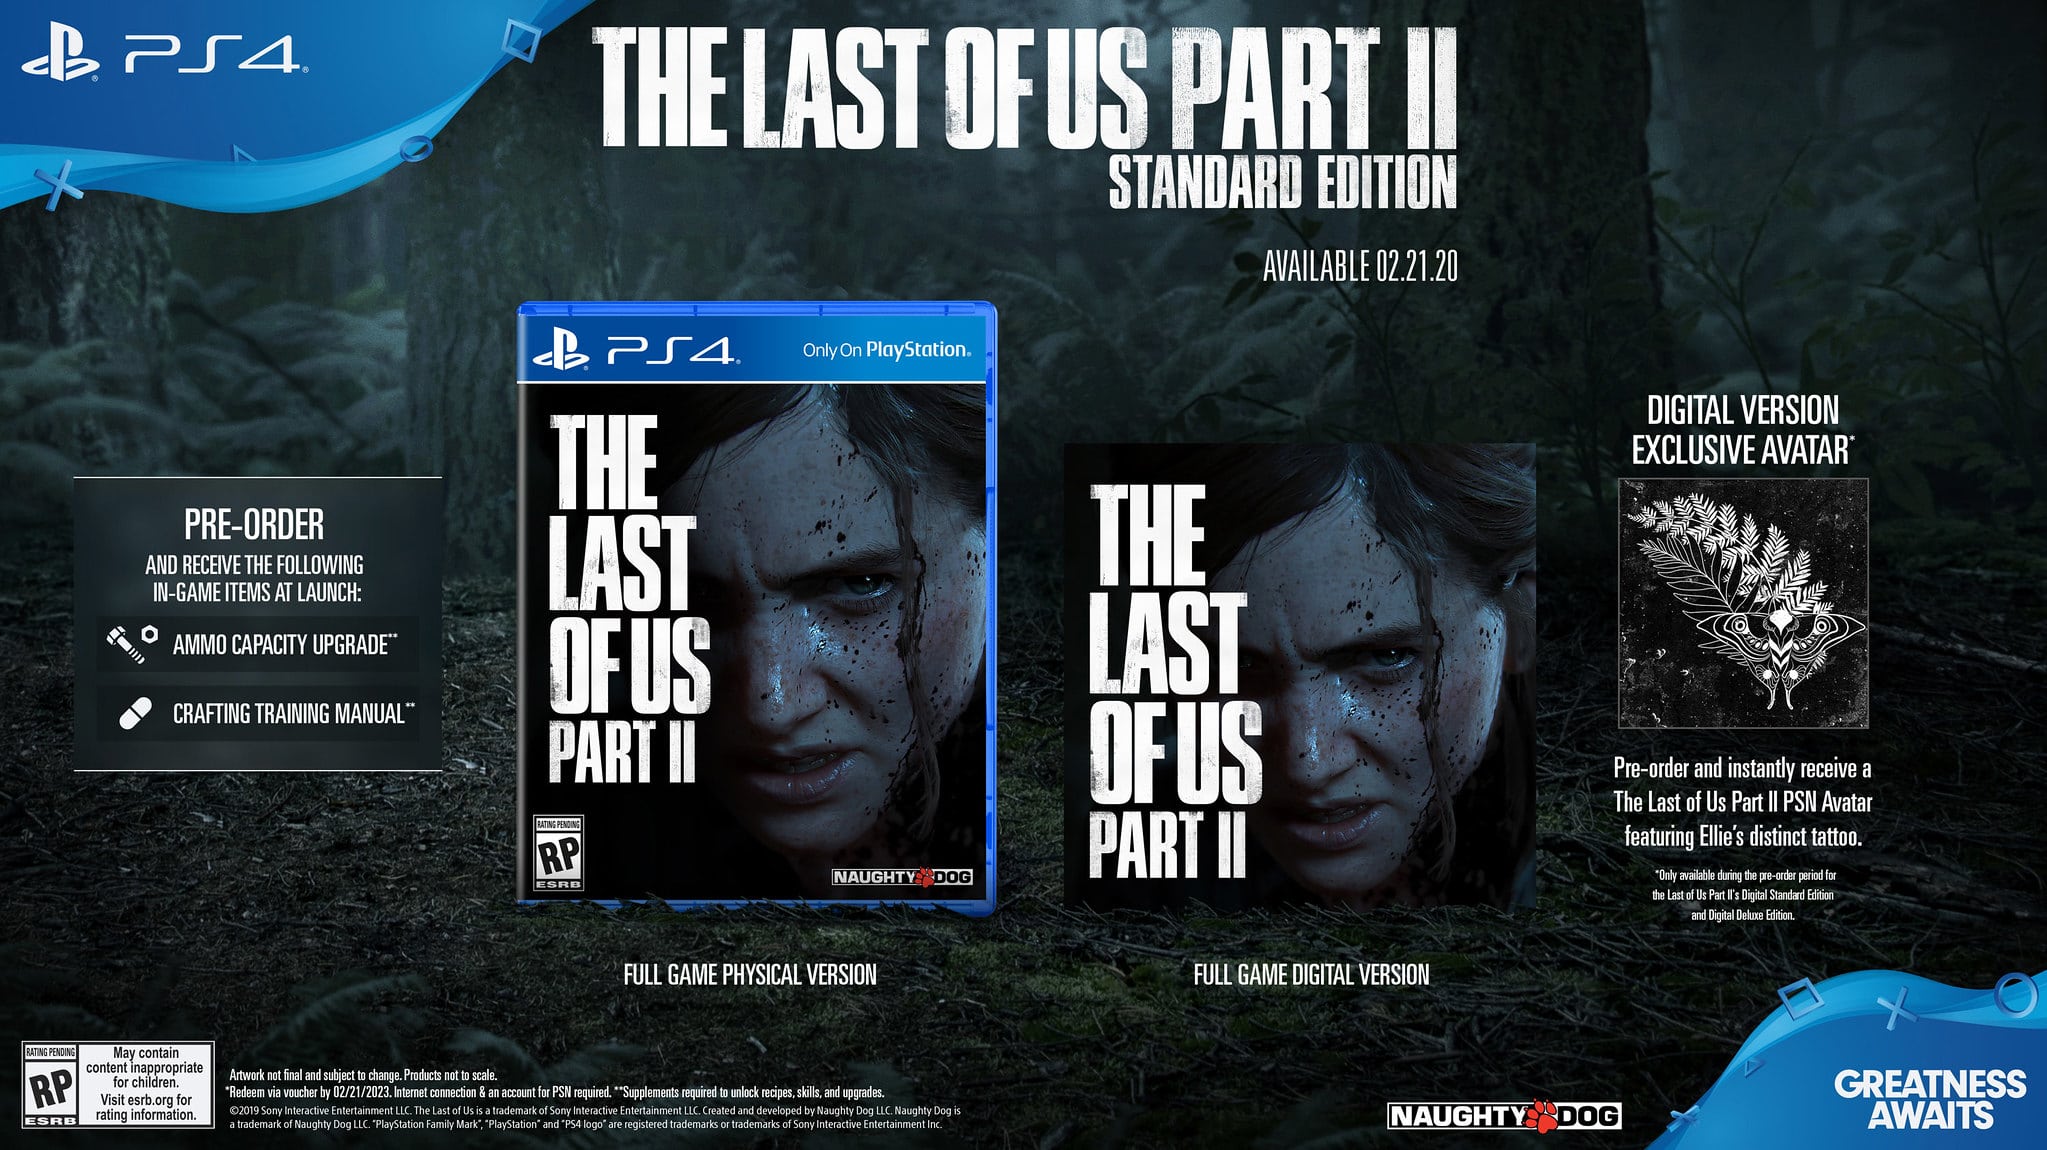 The last of us : part ii standard edition